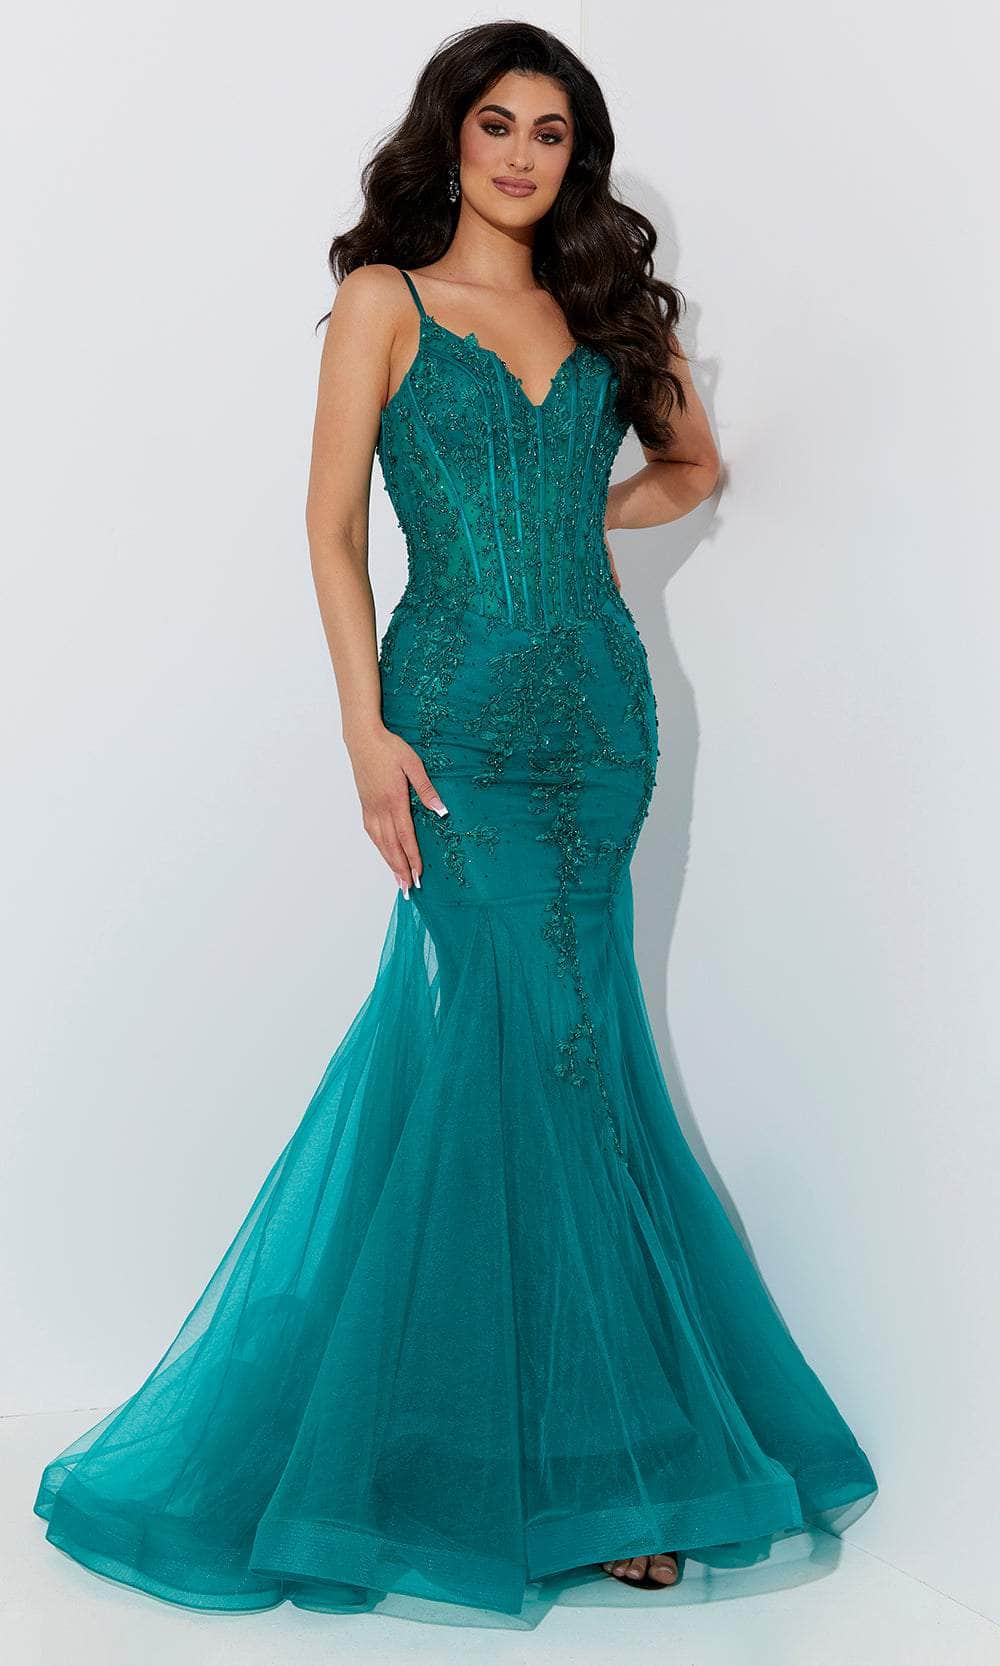 Image of Jasz Couture 7539 - Embroidered Corset Prom Dress